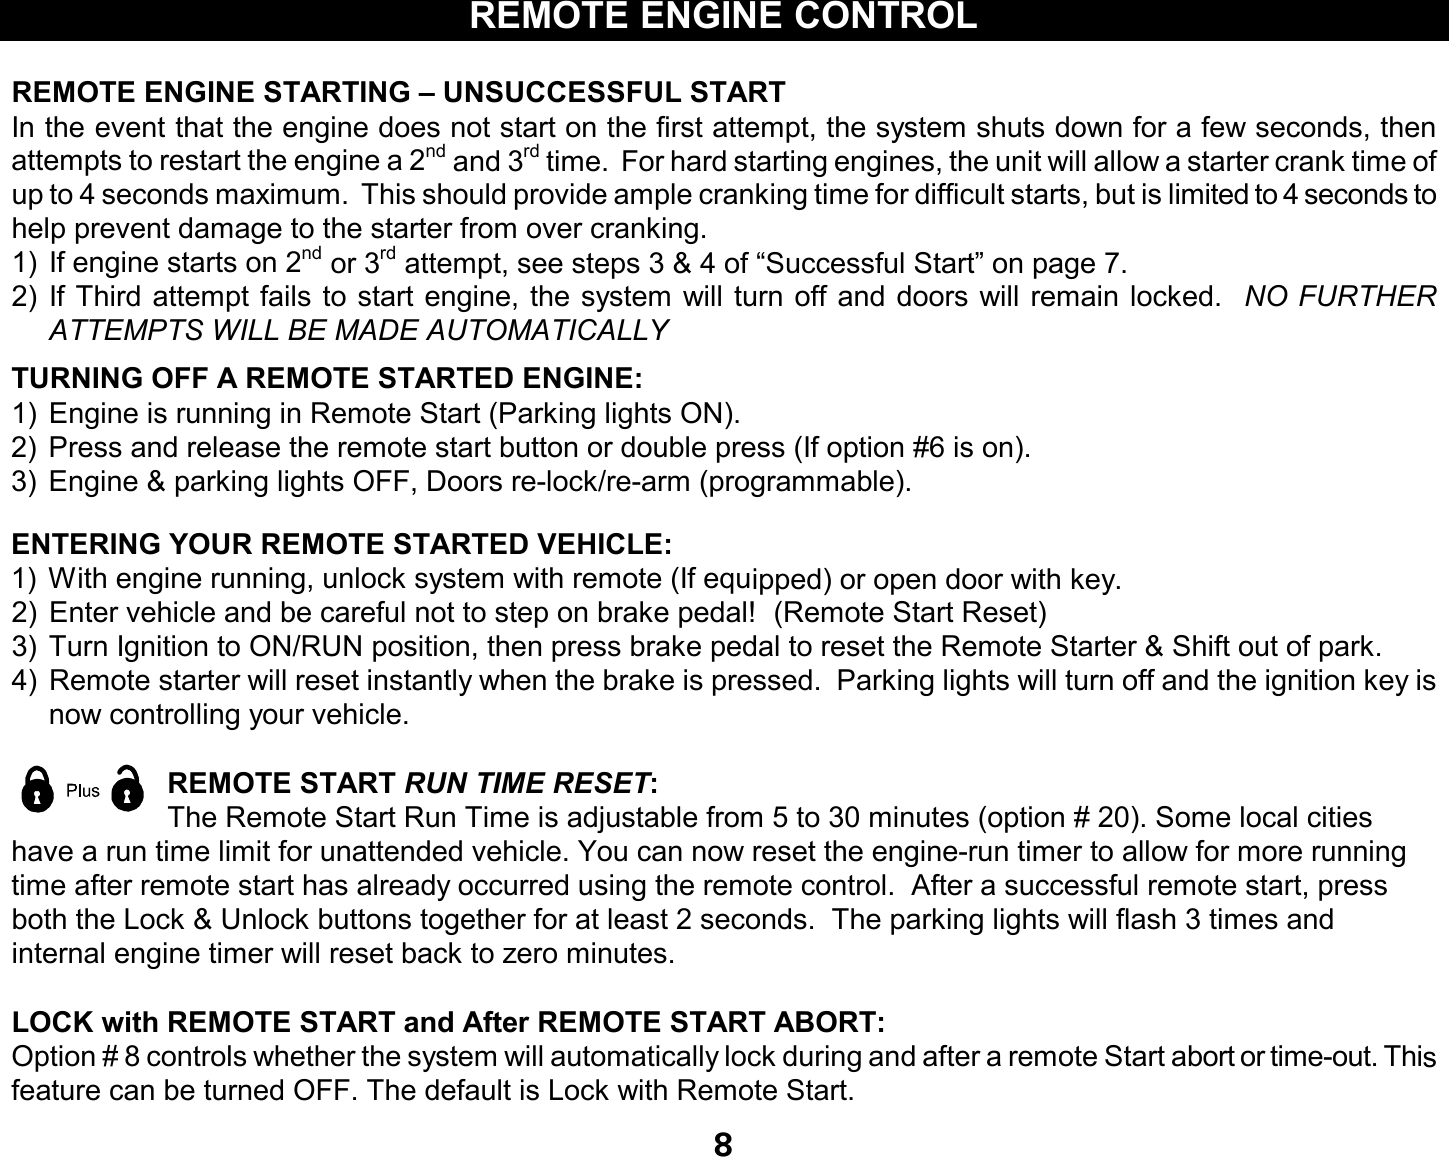 8REMOTE ENGINE CONTROLREMOTE ENGINE STARTING – UNSUCCESSFUL STARTIn the event that the engine does not start on the first attempt, the system shuts down for a few seconds, thenattempts to restart the engine a 2nd and 3rd time. For hard starting engines, the unit will allow a starter crank time ofup to 4 seconds maximum. This should provide ample cranking time for difficult starts, but is limited to 4 seconds tohelp prevent damage to the starter from over cranking.1) If engine starts on 2nd or 3rd attempt, see steps 3 &amp; 4 of “Successful Start” on page 7.2) If Third attempt fails to start engine, the system will turn off anddoors will remain locked. NO FURTHERATTEMPTS WILL BE MADE AUTOMATICALLYTURNING OFF A REMOTE STARTED ENGINE:1) Engine is running in Remote Start (Parking lights ON).2) Press and release the remote start button or double press (If option #6 is on).3) Engine &amp; parking lights OFF, Doors re-lock/re-arm (programmable).ENTERING YOUR REMOTE STARTED VEHICLE:1) With engine running, unlock system with remote (If equipped) or opendoor with key.2) Enter vehicle and be careful not to step on brake pedal! (Remote Start Reset)3) Turn Ignition to ON/RUN position, thenpress brake pedal to reset the Remote Starter &amp; Shift out of park.4) Remote starter will reset instantly when the brake is pressed. Parking lights will turn off and the ignition key isnow controlling your vehicle.REMOTE START RUN TIME RESET:The Remote Start Run Time is adjustable from 5 to 30 minutes (option # 20). Some local citieshave a run time limit for unattended vehicle. You can now reset the engine-run timer to allow for morerunningtime after remote start has already occurred using the remote control. After a successful remote start, pressboth the Lock &amp; Unlock buttons together for at least 2 seconds. The parking lights will flash 3 times andinternal engine timer will reset back to zero minutes.LOCK with REMOTE START and After REMOTE START ABORT:Option # 8 controls whether the system will automatically lock during and after a remote Start abort or time-out. Thisfeature can be turned OFF. The default is Lock with Remote Start.